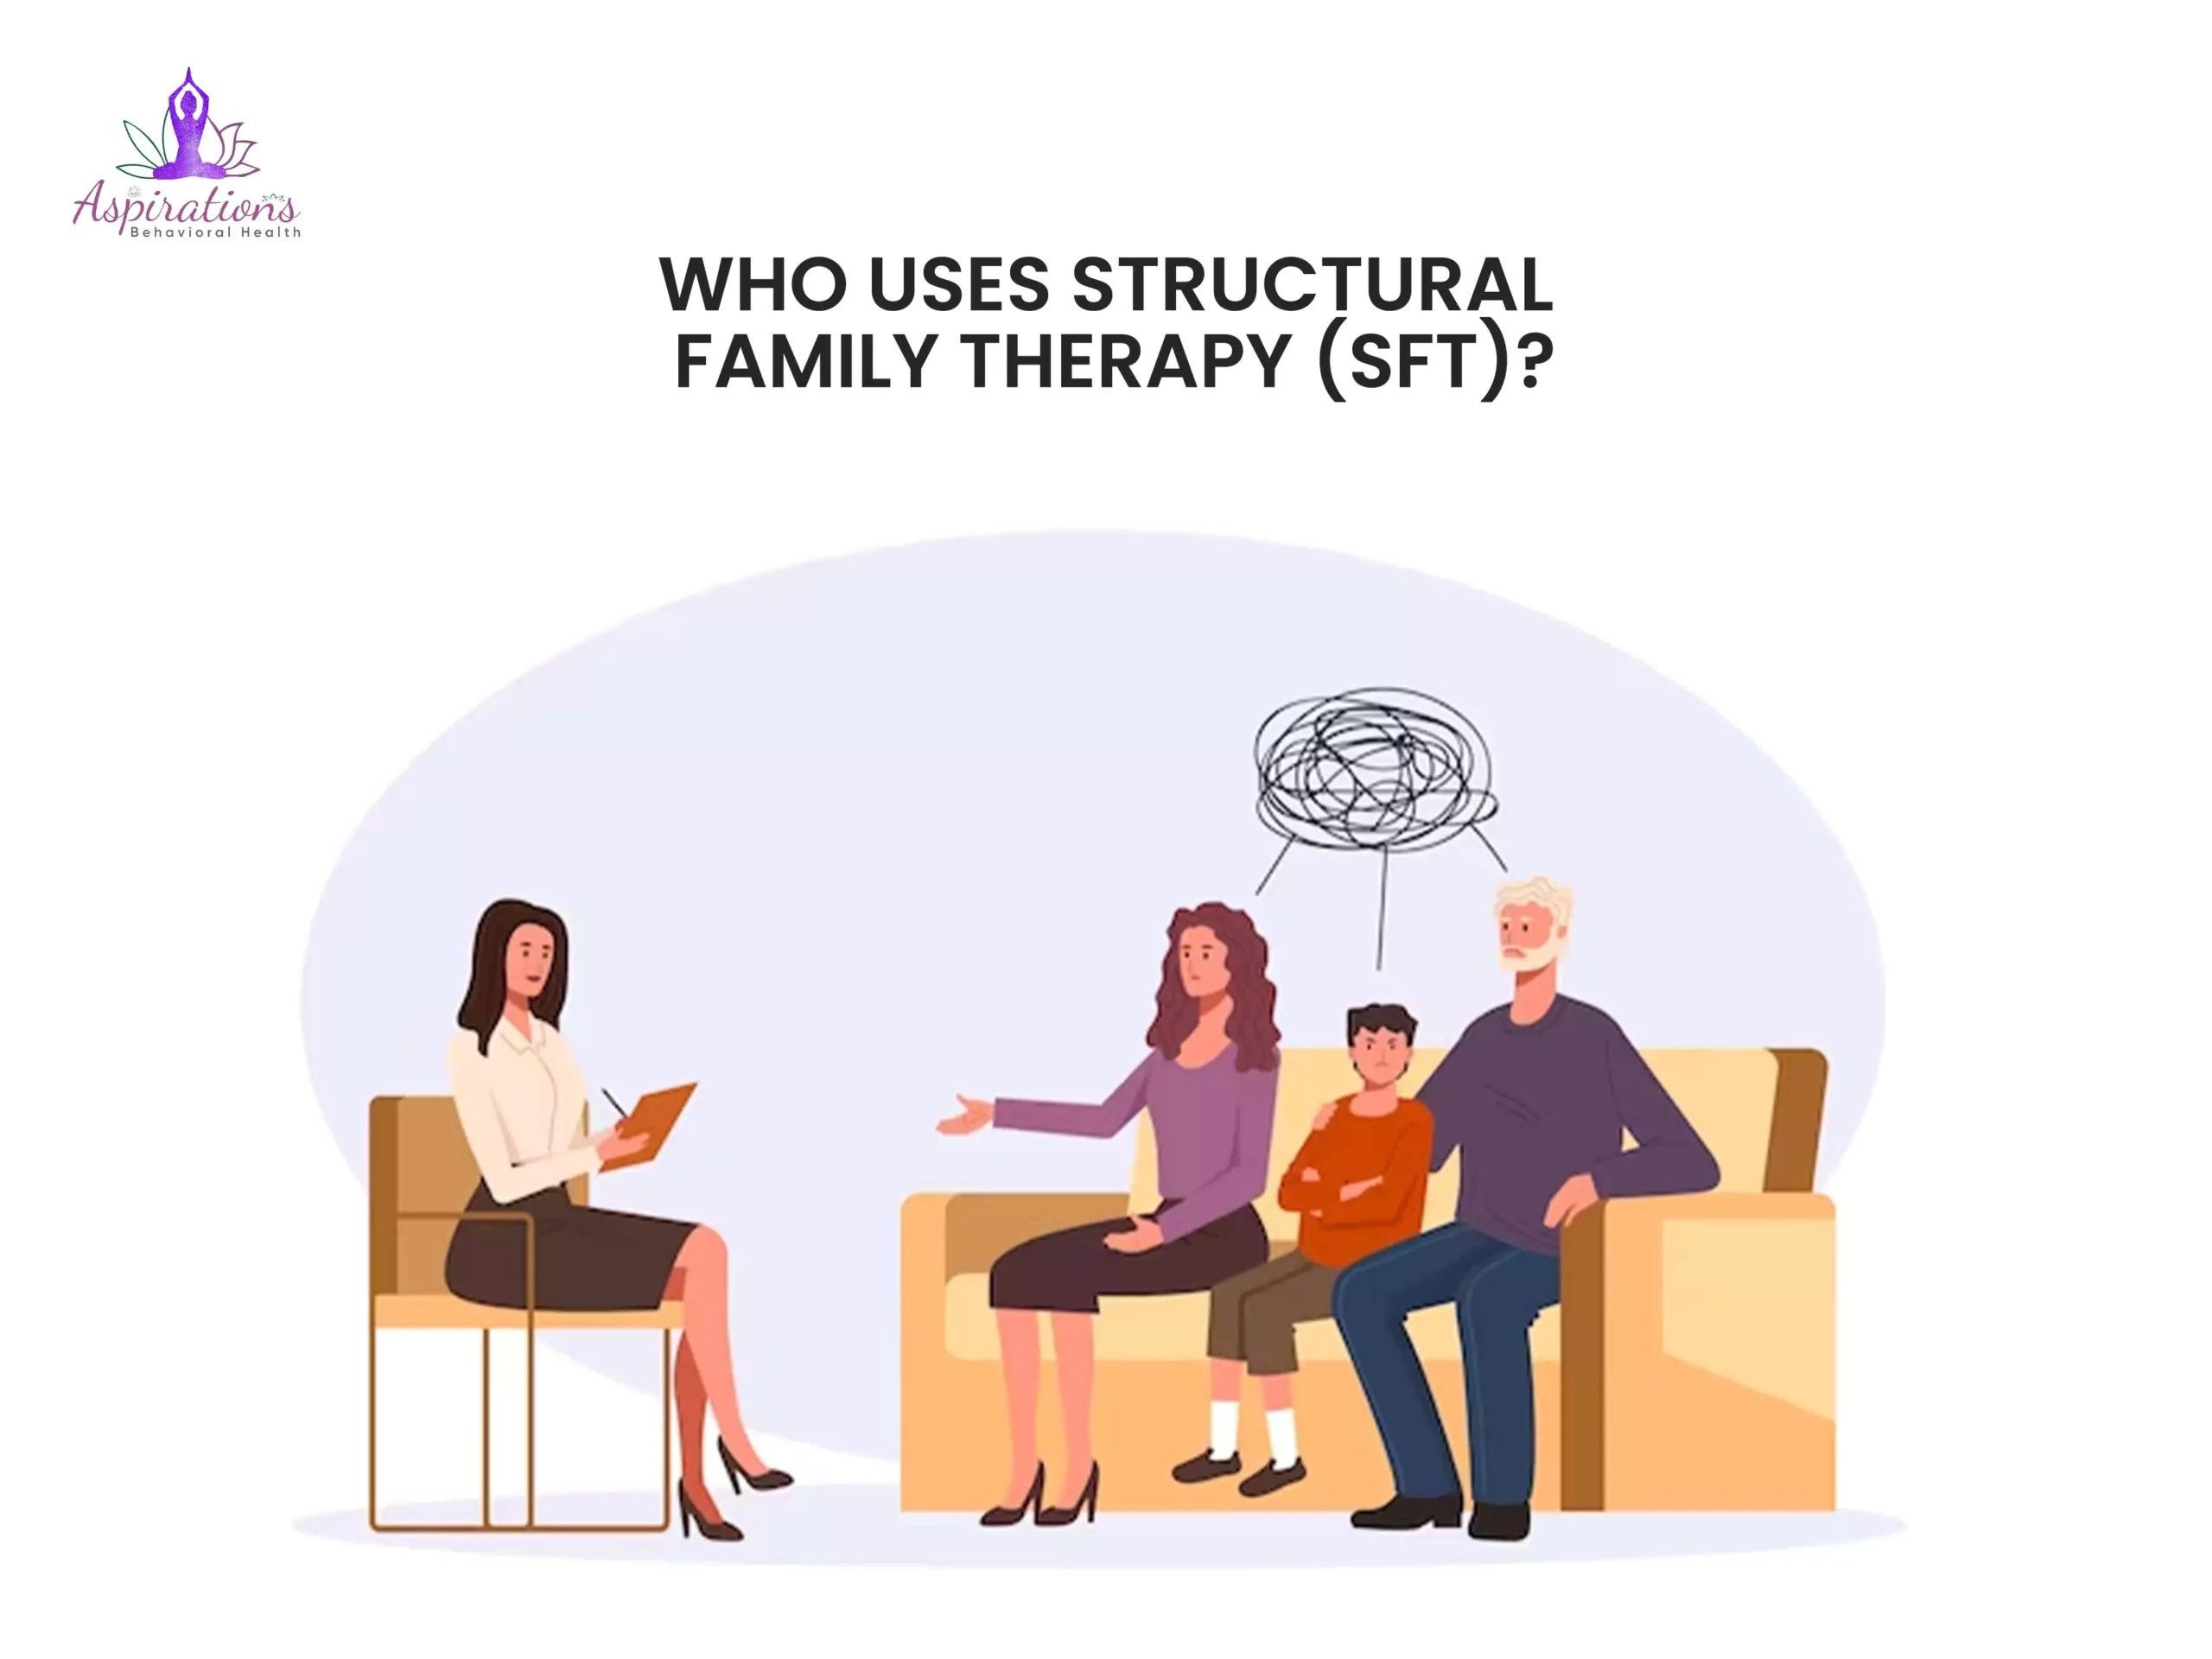 Who Uses Structural Family Therapy (SFT)?